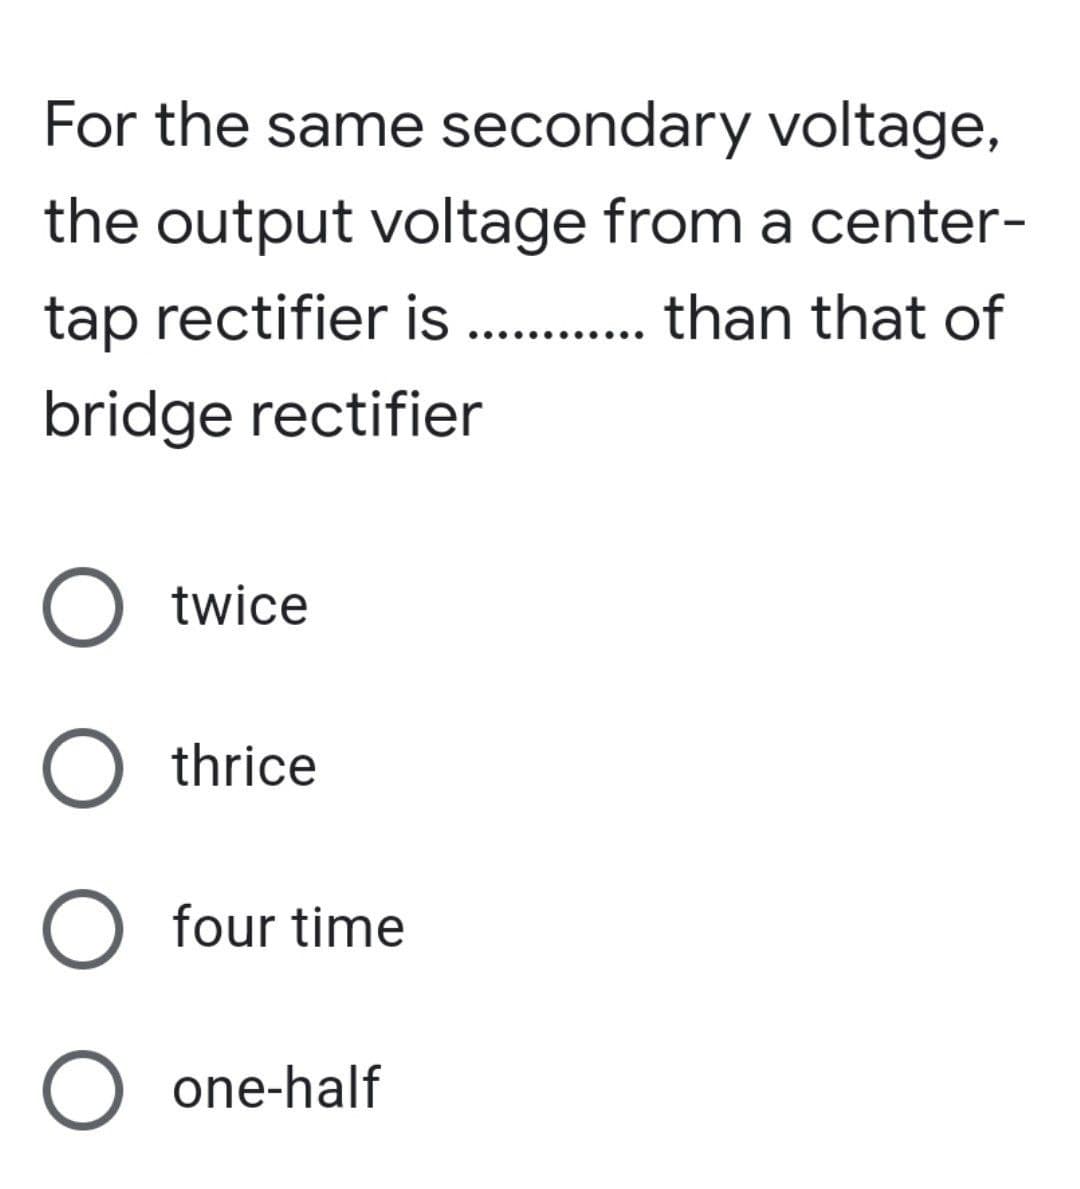 For the same secondary voltage,
the output voltage from a center-
tap rectifier is ............. than that of
bridge rectifier
O twice
O thrice
O four time
O one-half